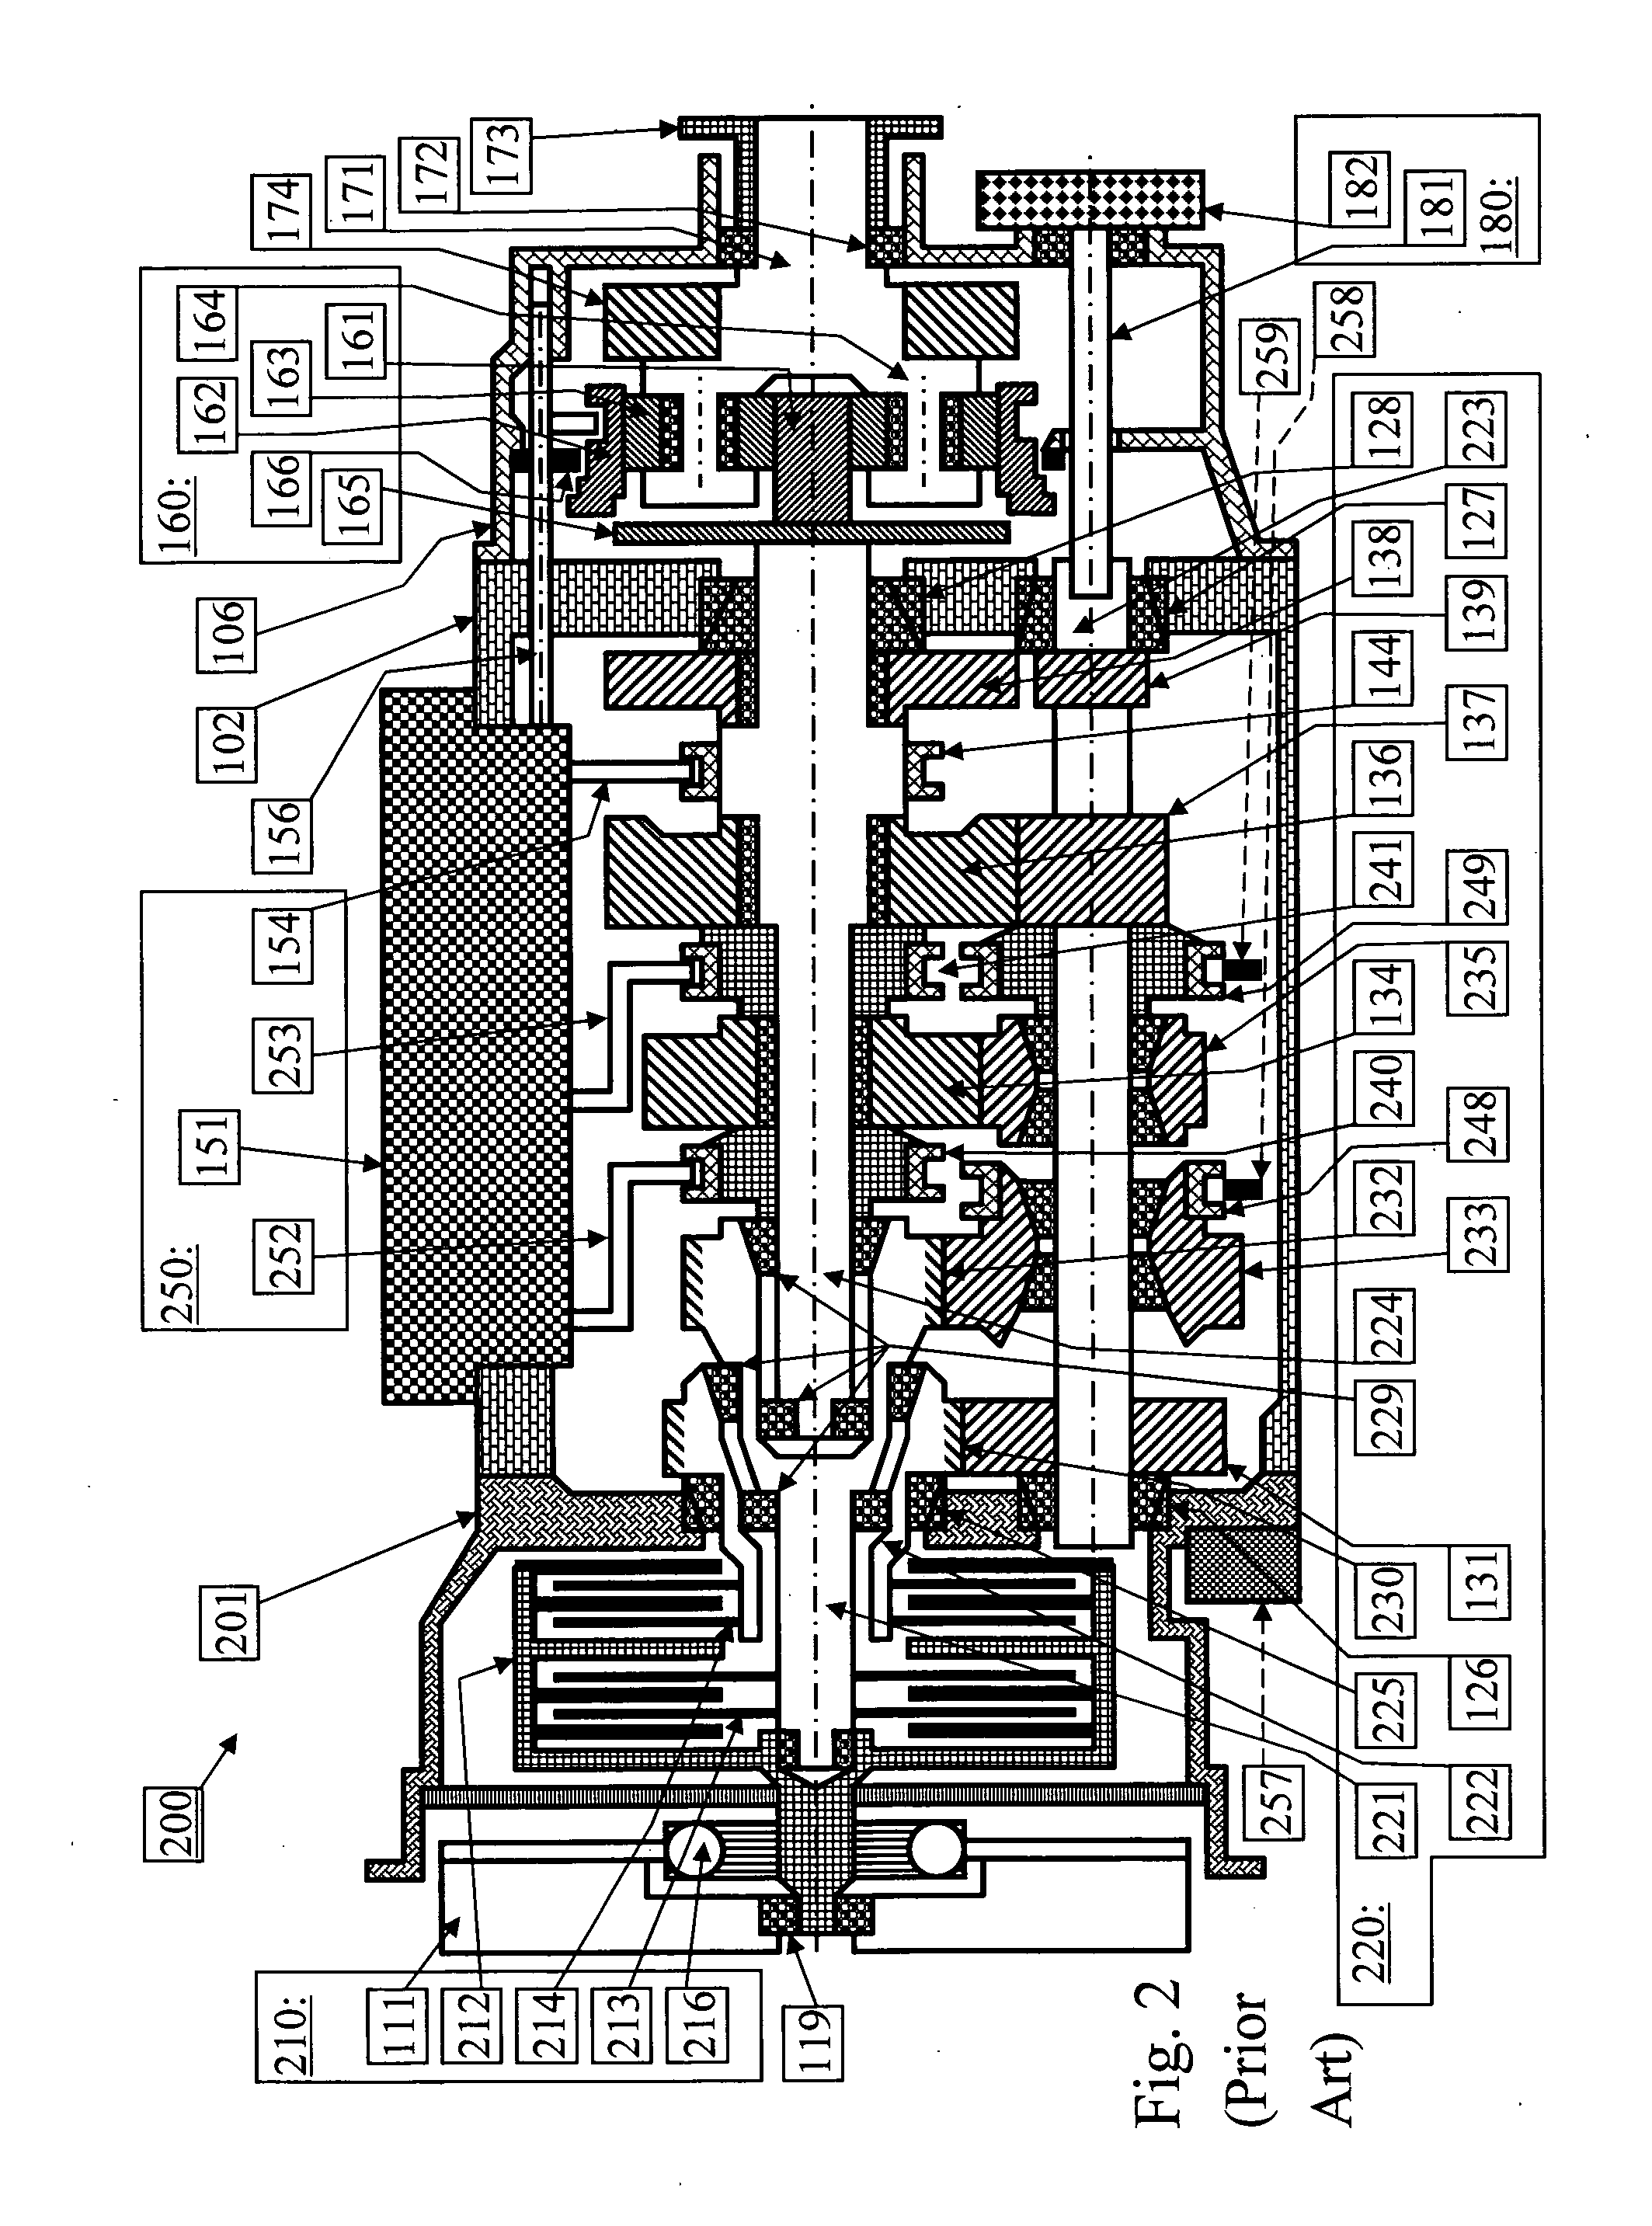 Powershift transmission in a motor vehicle